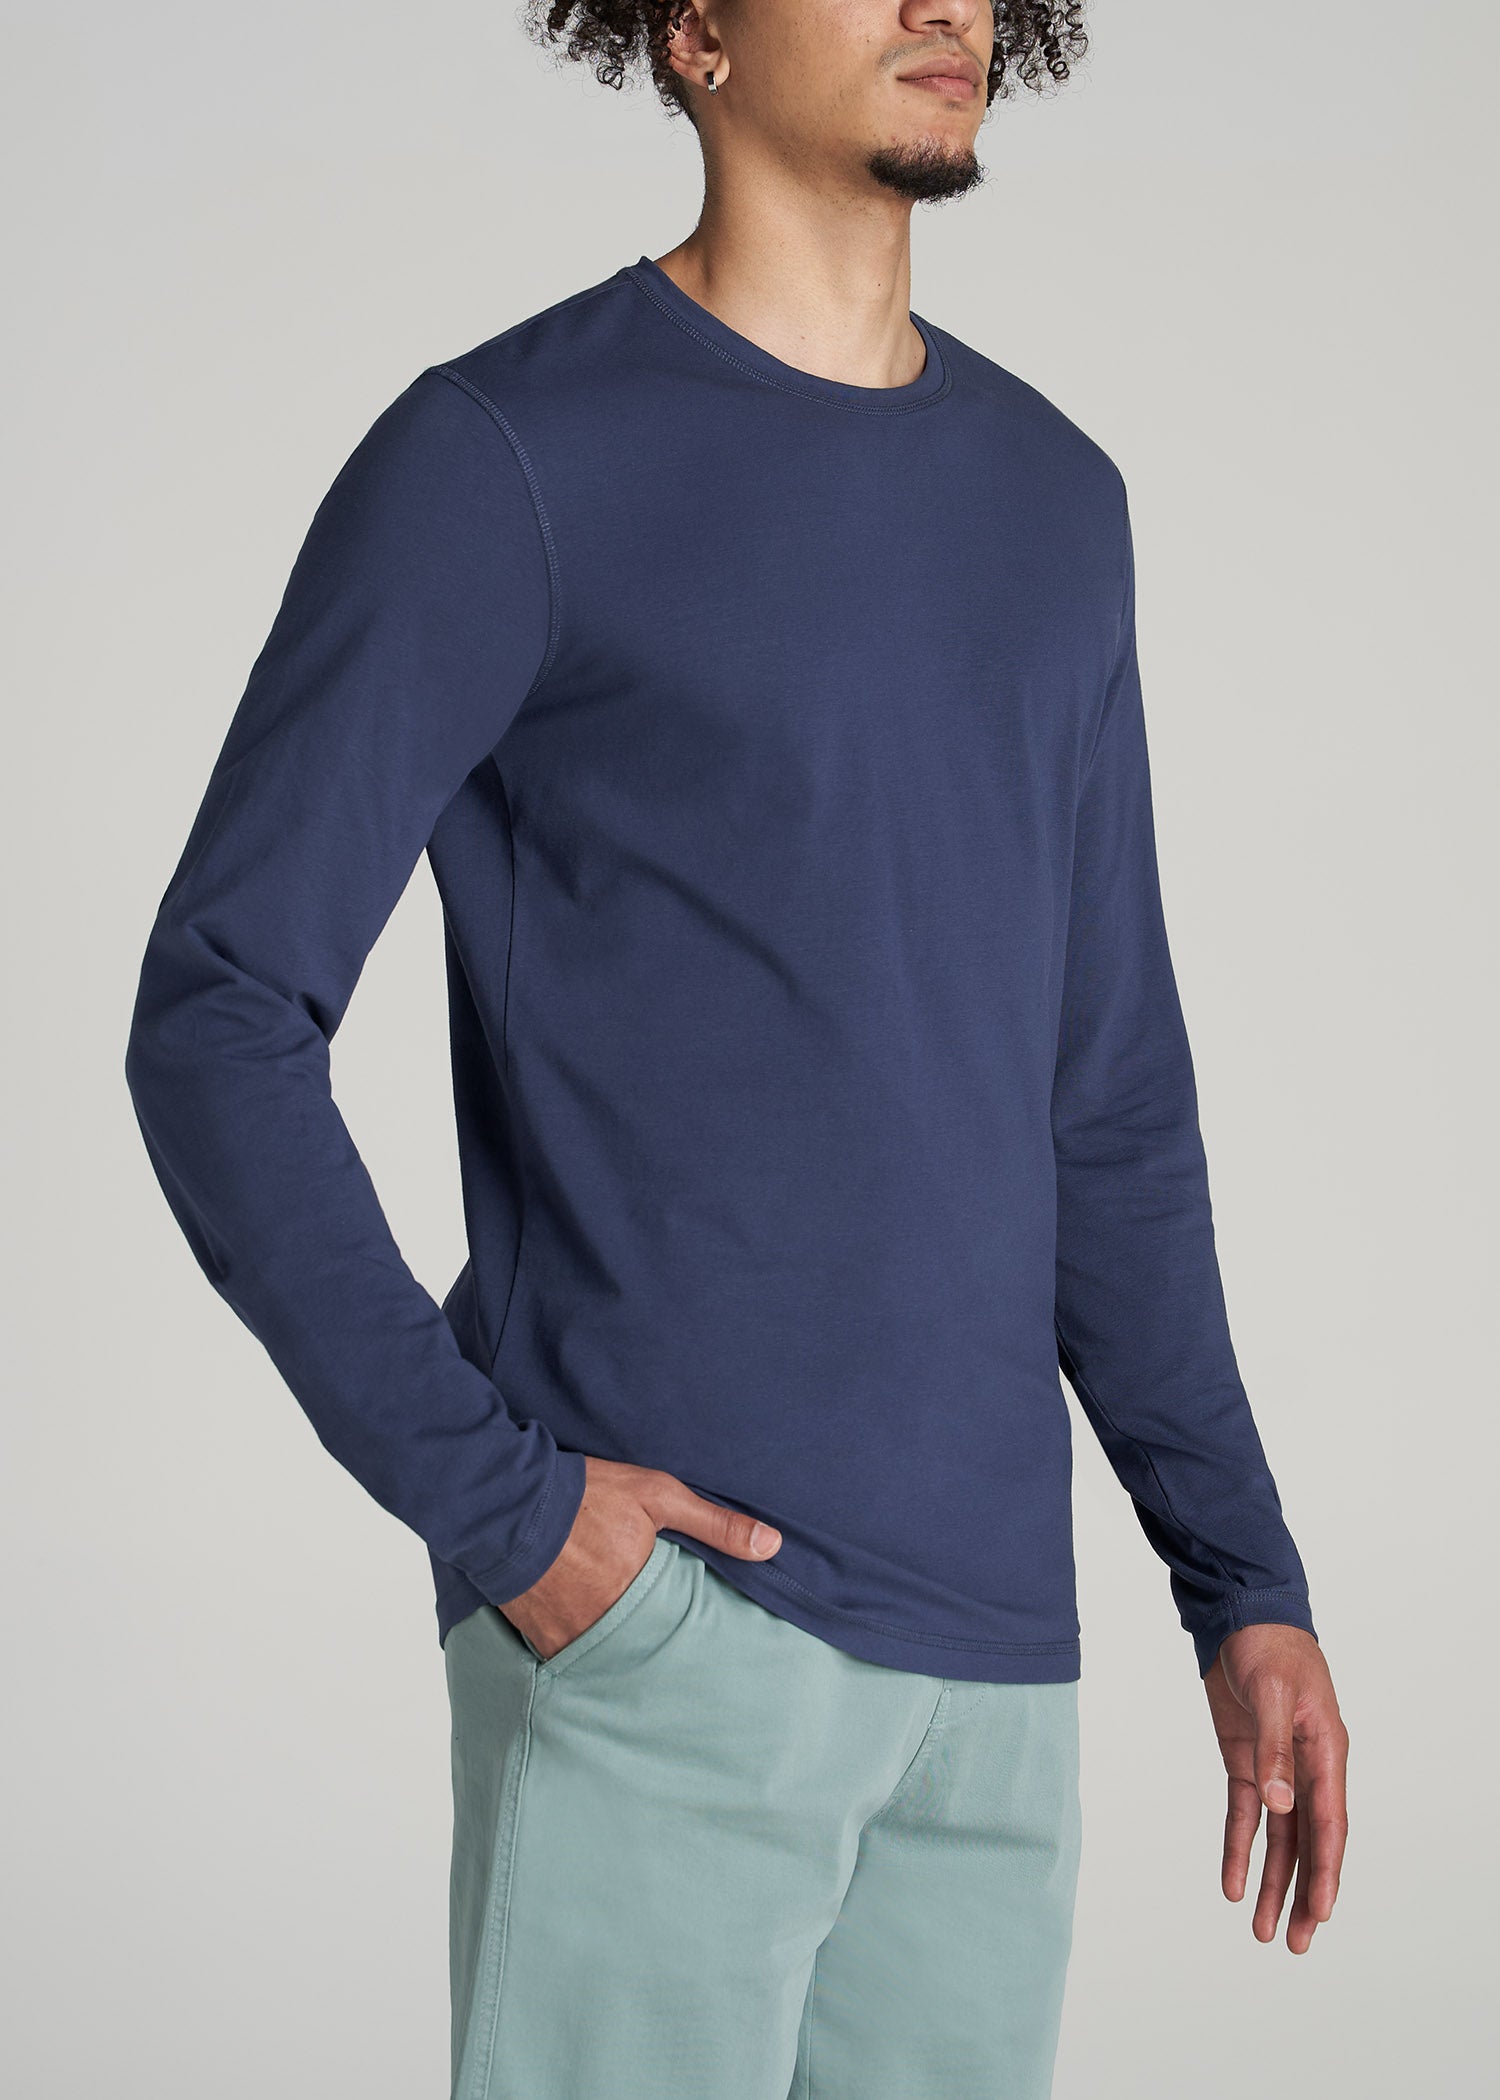 Semi-tall man wearing American Tall's Original Essentials Slim-Fit Long-Sleeve T-Shirt in the color Navy.